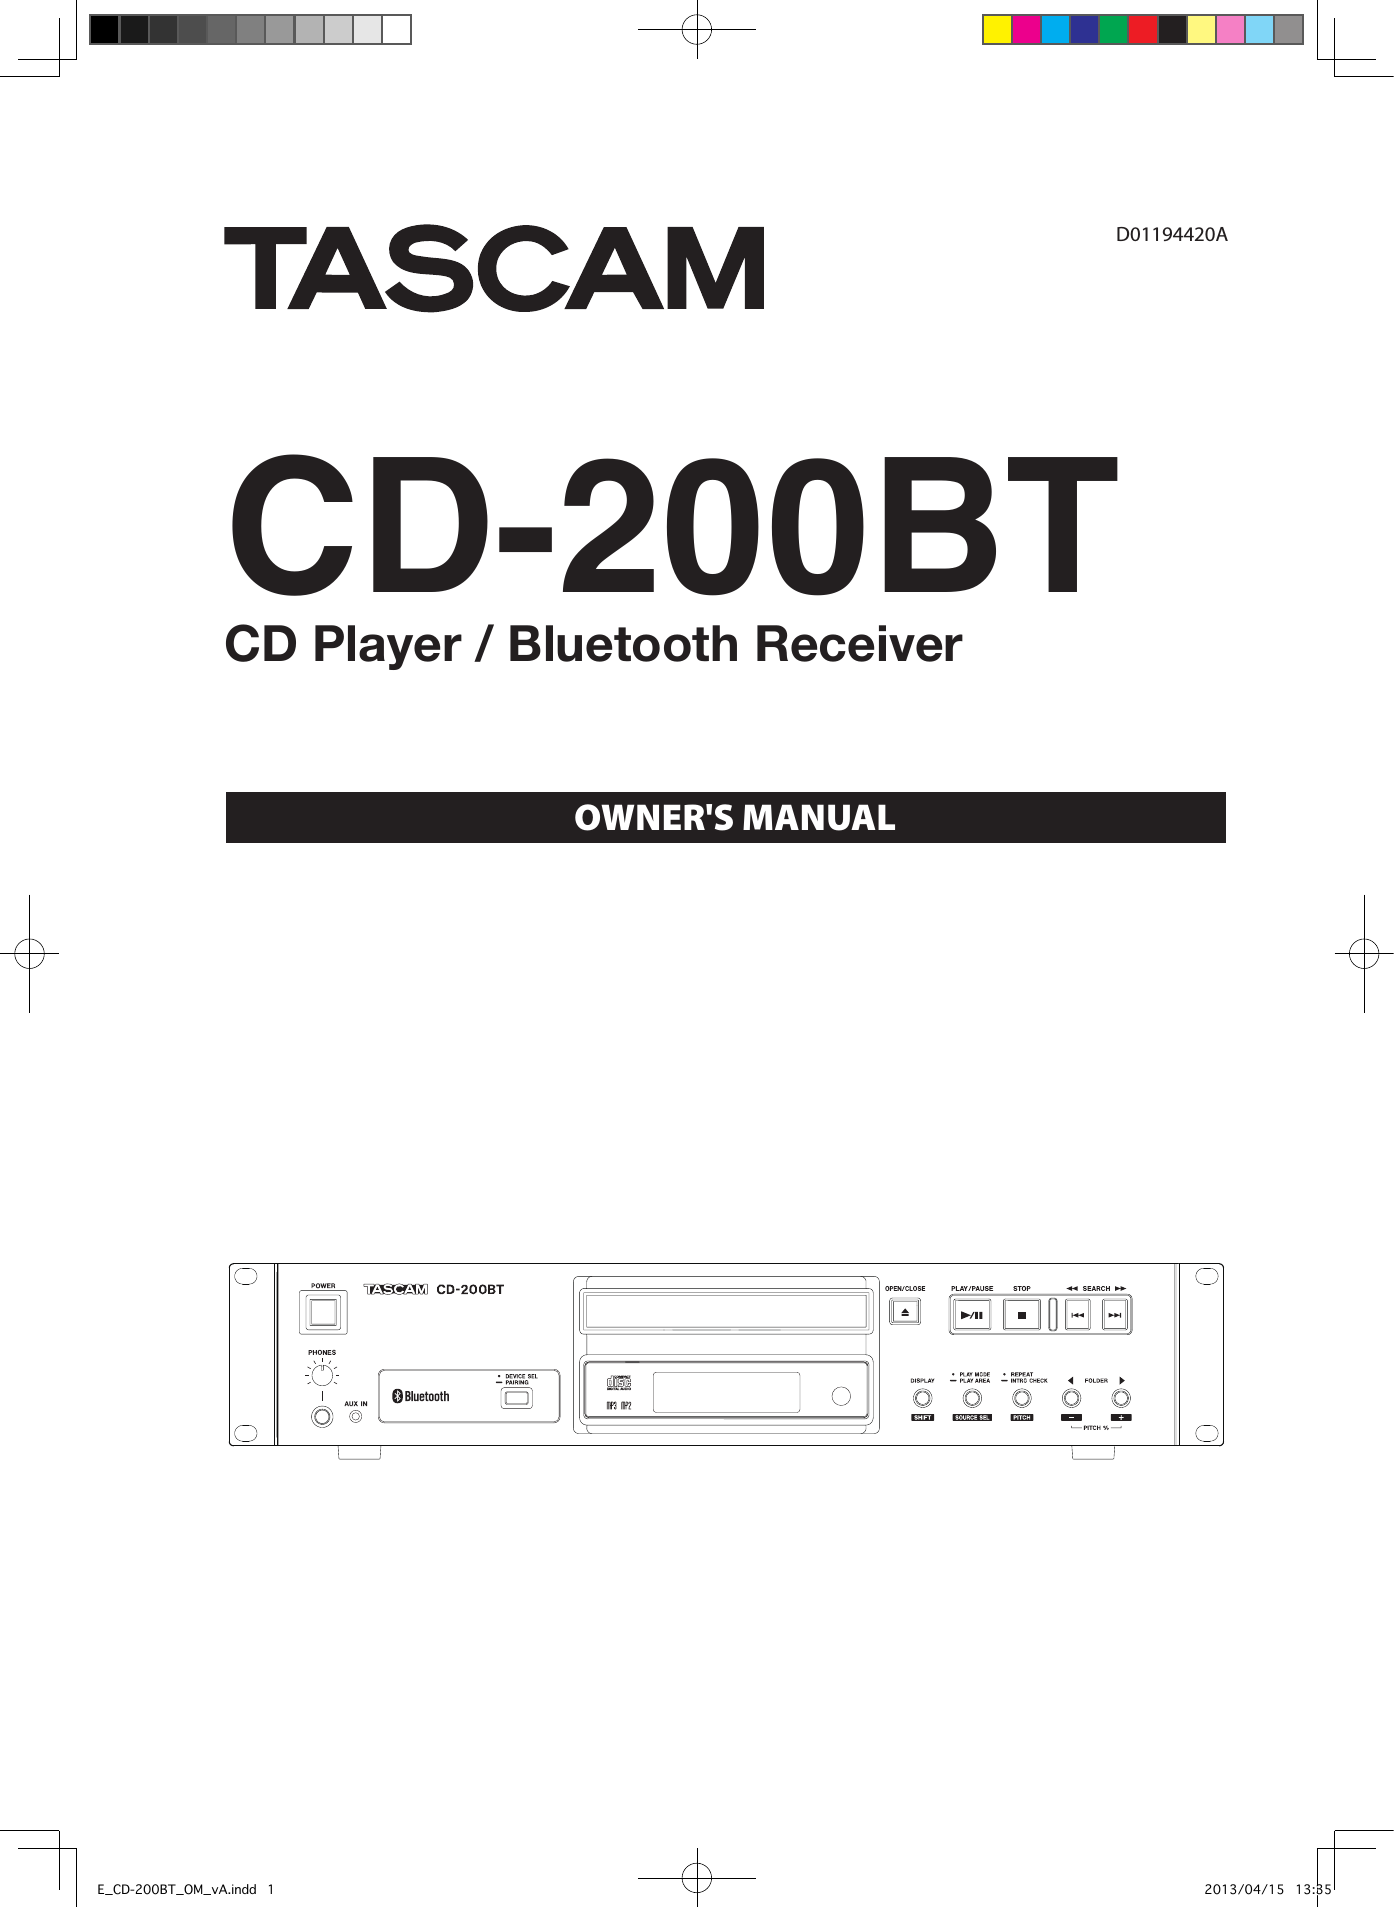 D01194420ACD-200BTCD Player / Bluetooth ReceiverOWNER&apos;S MANUALE_CD-200BT_OM_vA.indd   1 2013/04/15   13:35